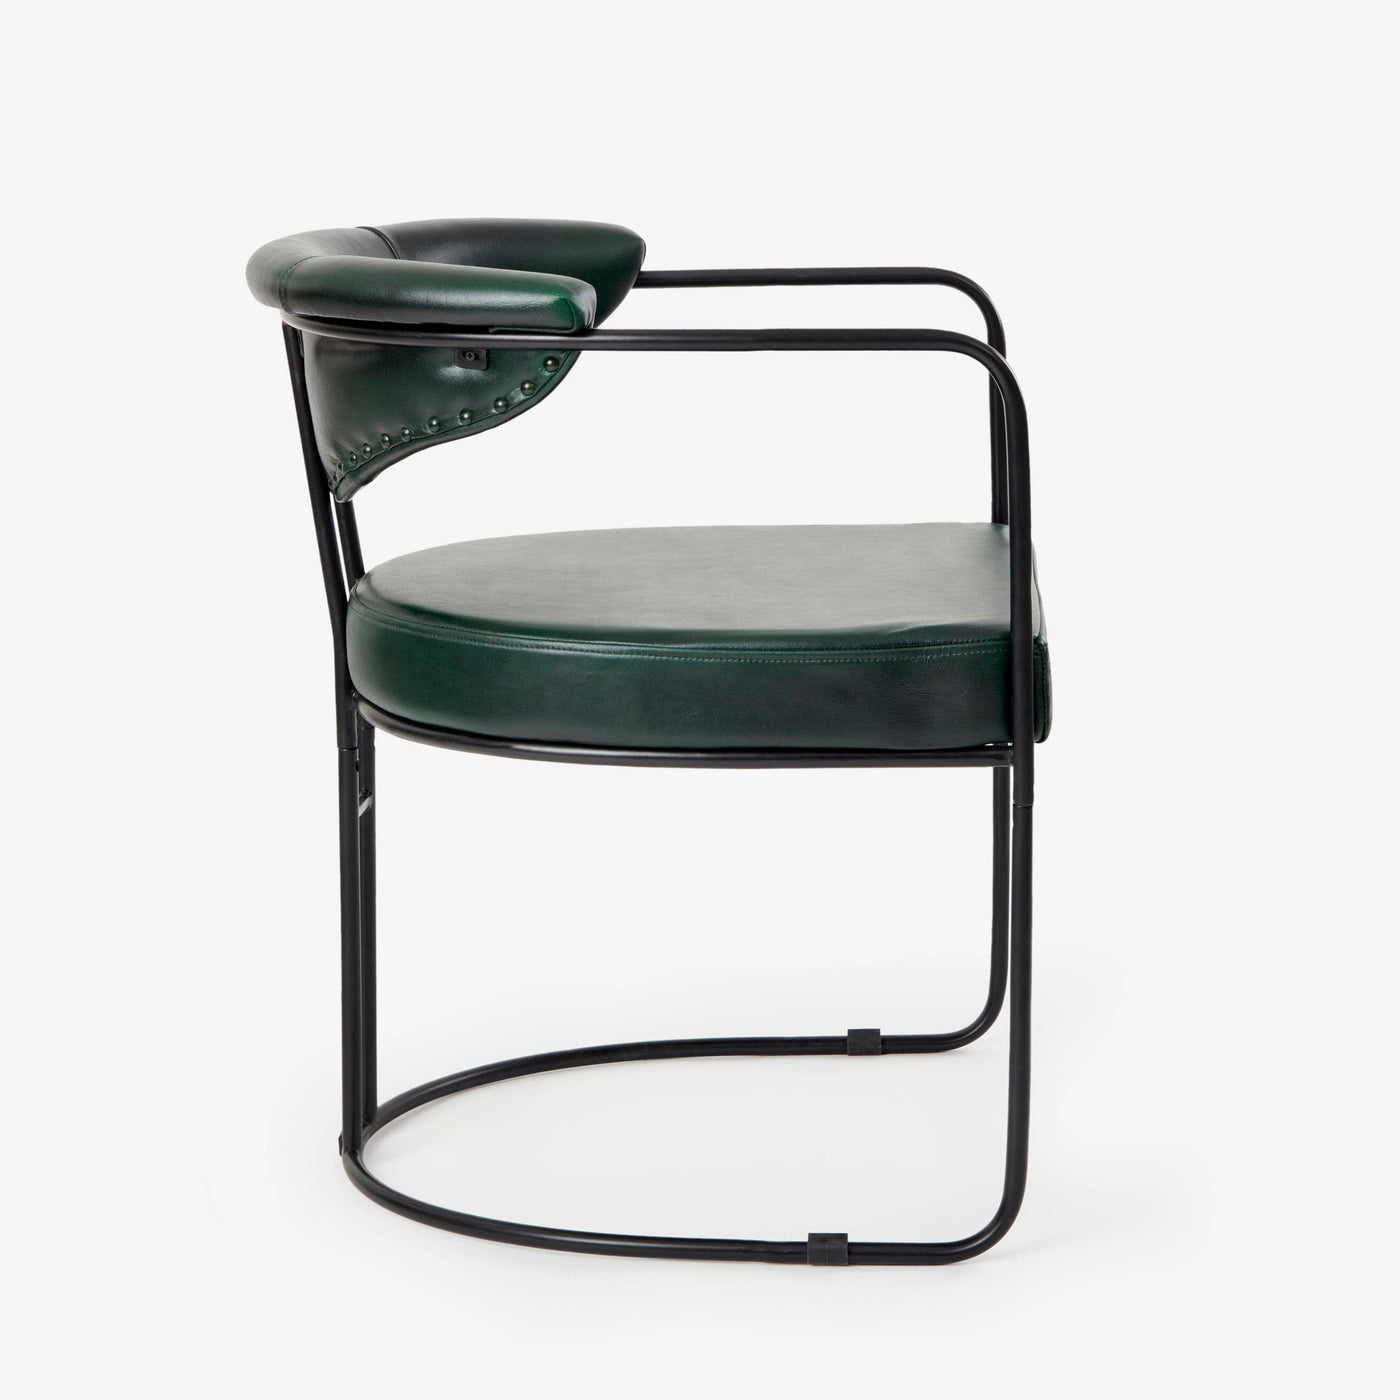 Itari Leather Armchair, Green Dining Chairs & Benches sazy.com